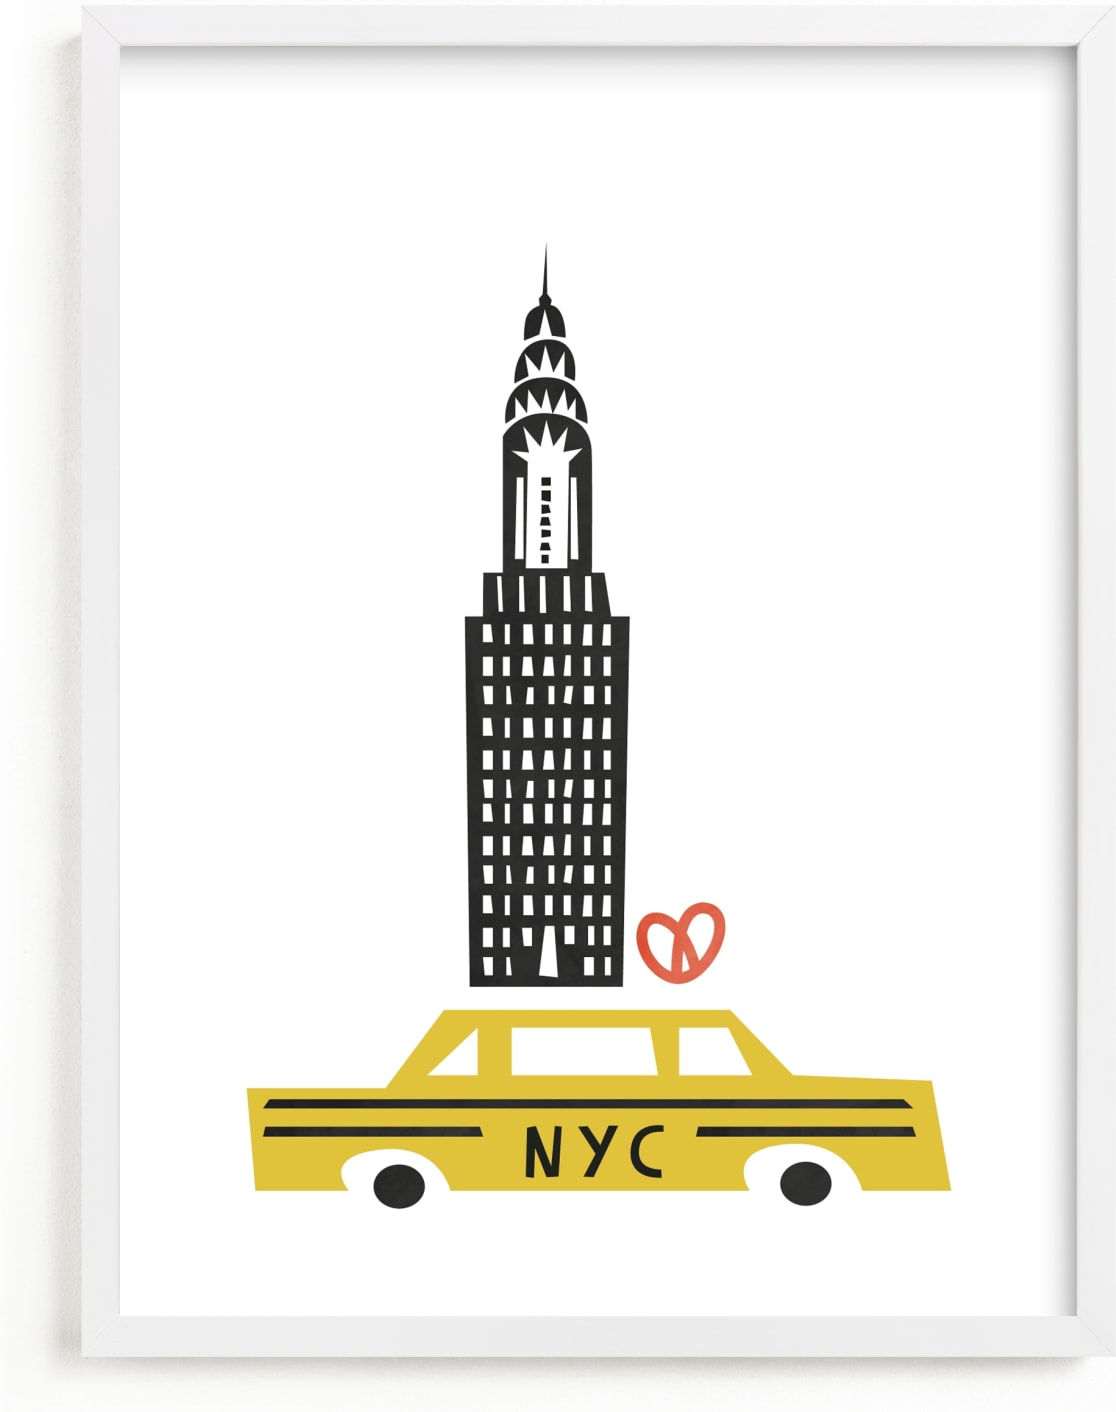 This is a colorful kids wall art by Nazia Hyder called NYC.